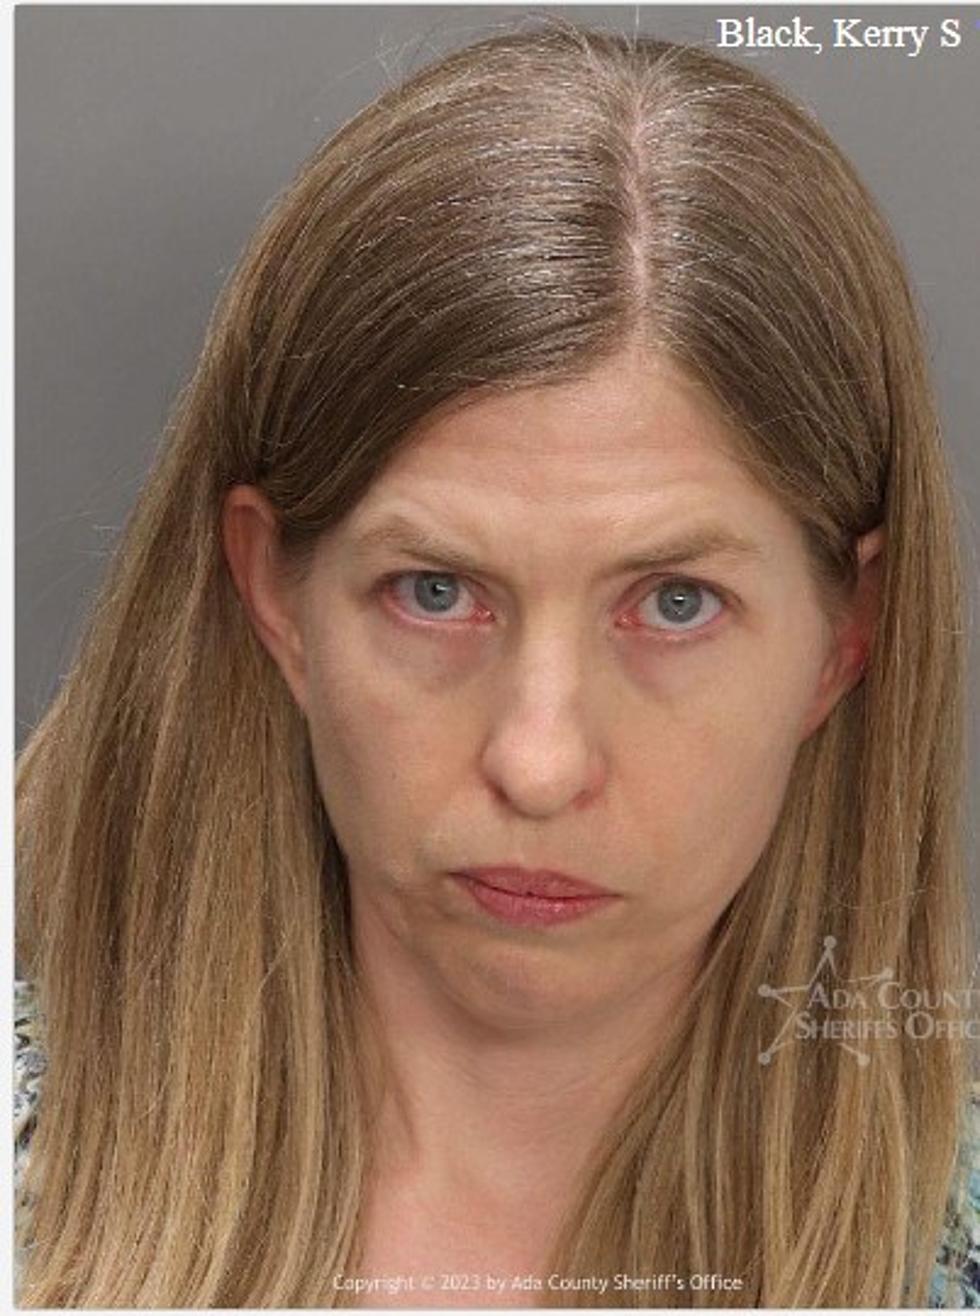 A Caldwell School Teacher Arrested For 5 Counts of Battery And More